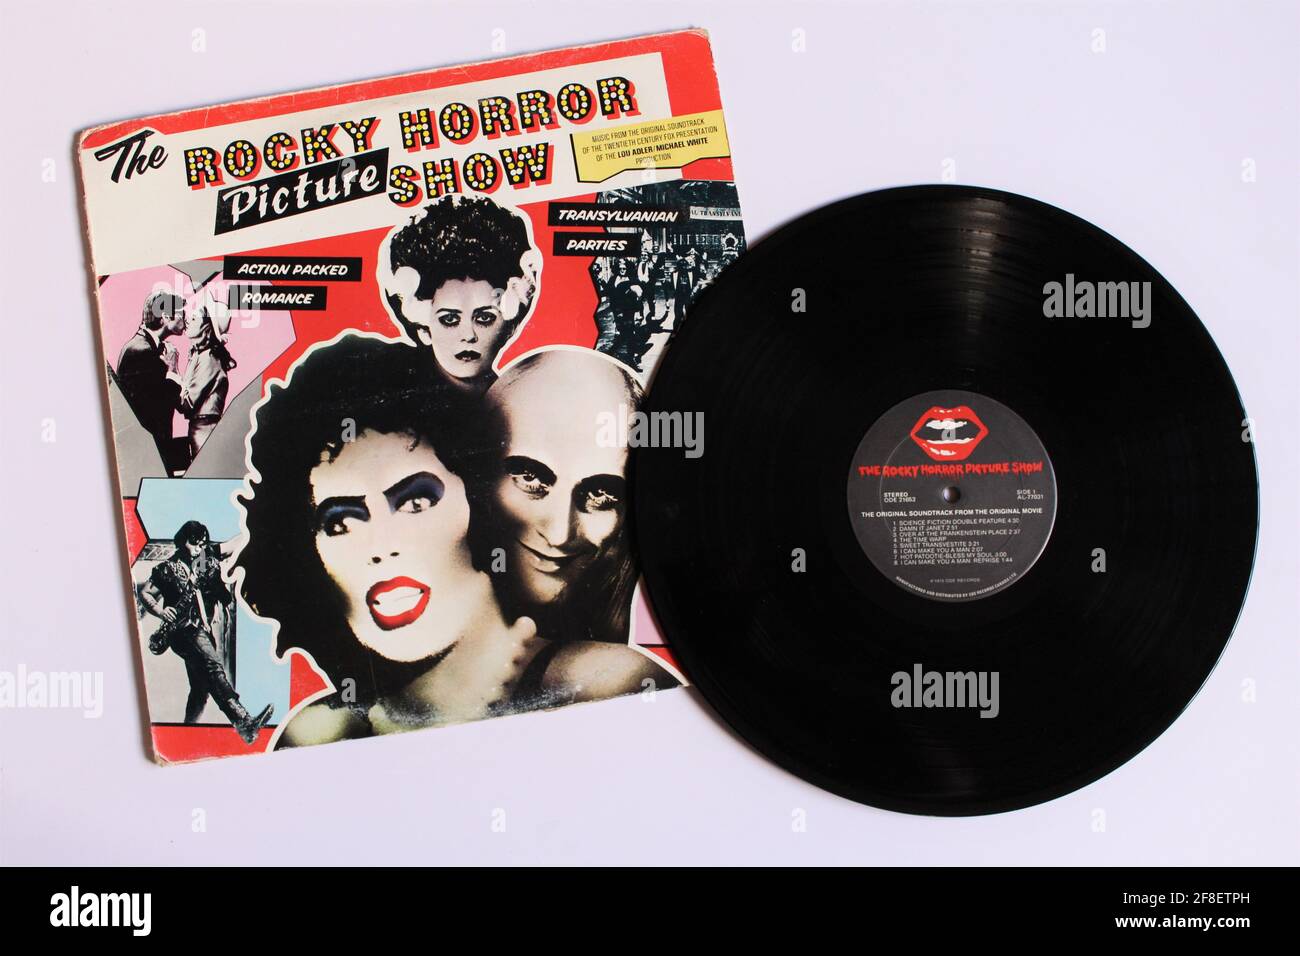 The Rocky Horror Picture Show is the original soundtrack album to the 1975 film from the musical. Album on vinyl record LP disc. Album cover Stock Photo